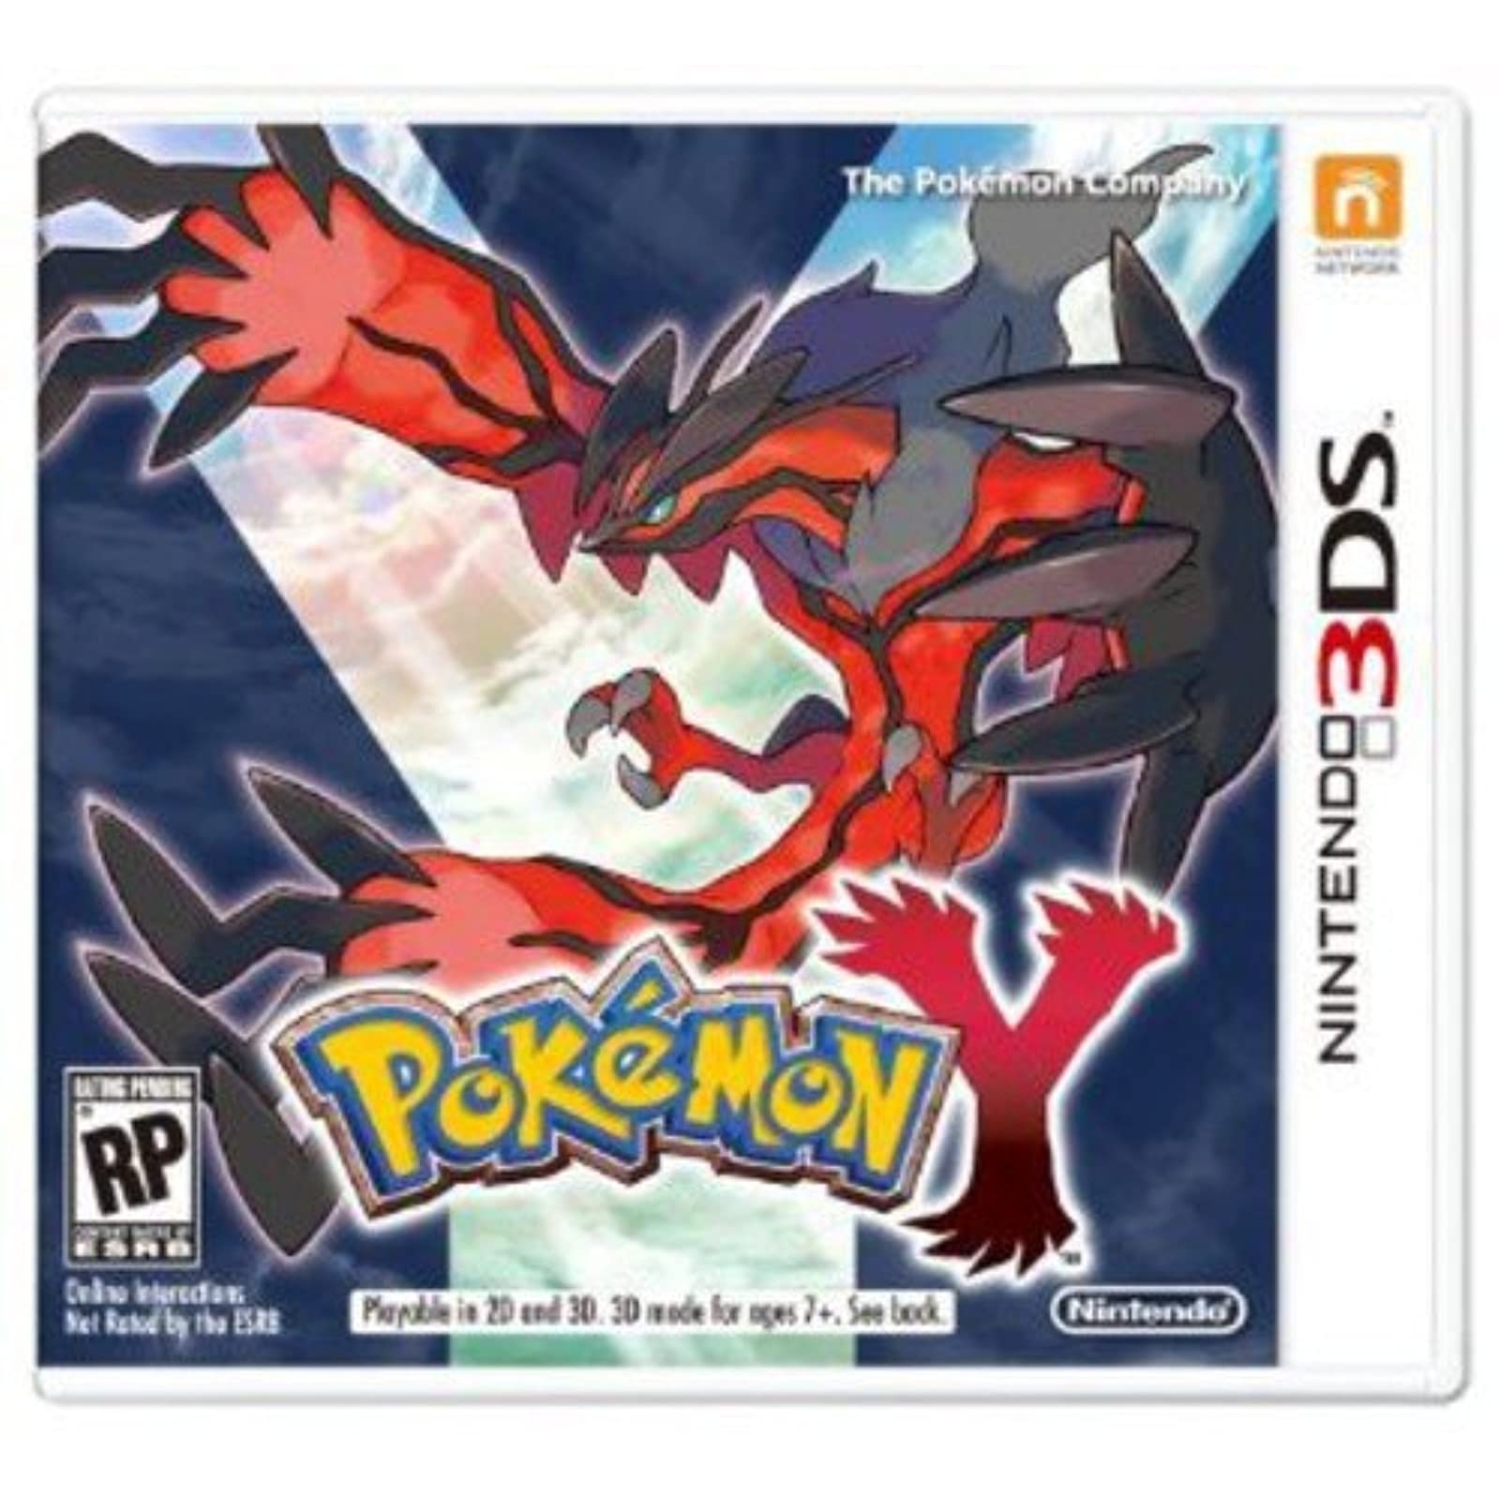 Previously Played - Pokemon Y For 3DS RPG